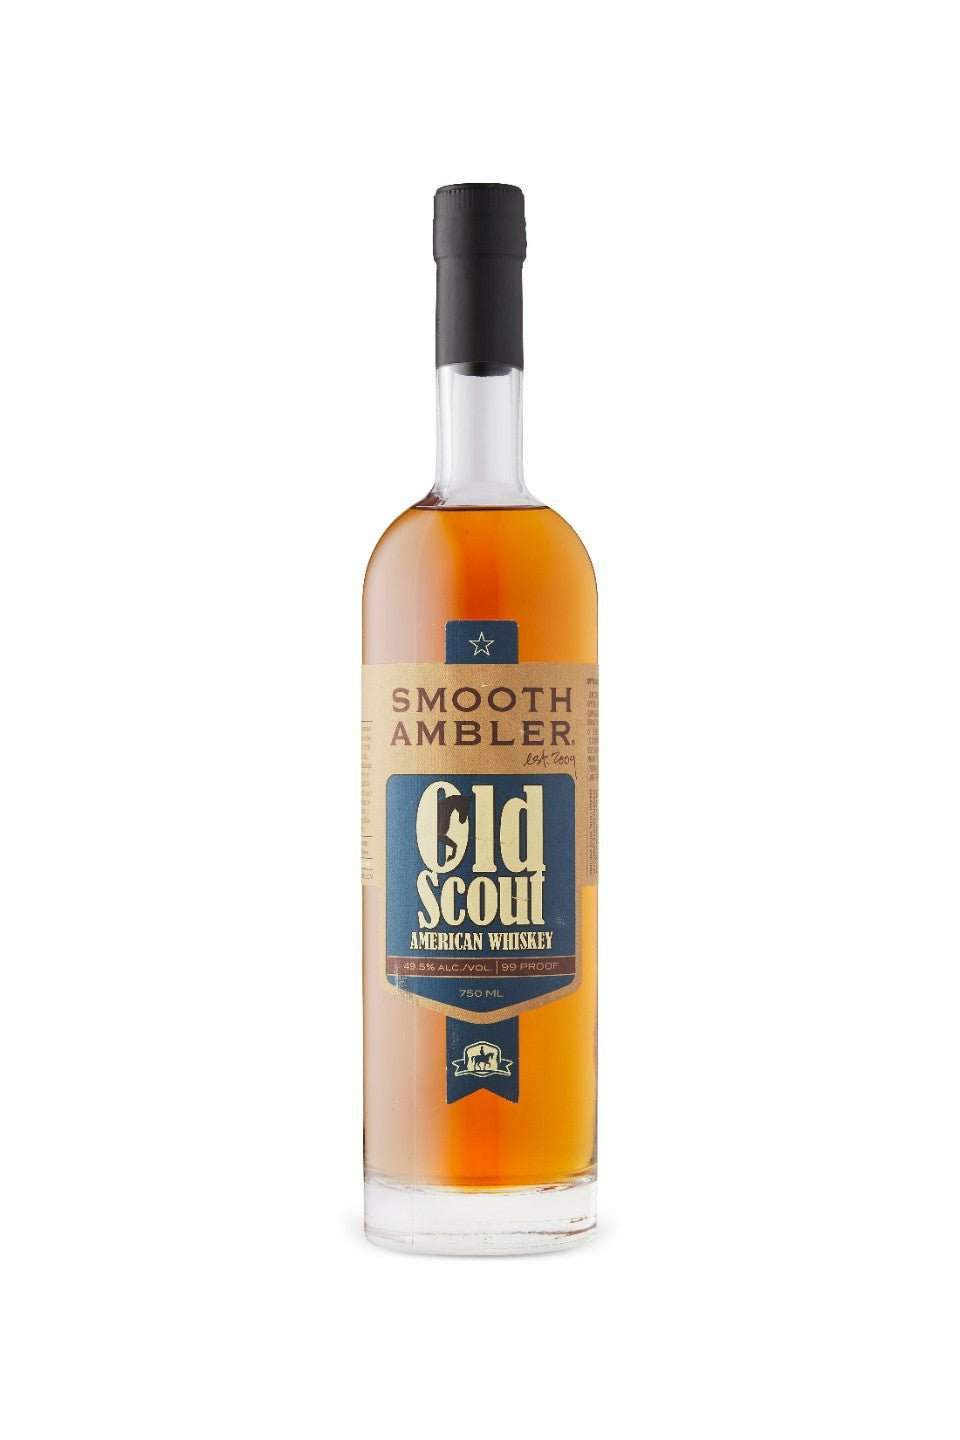 Smooth Ambler - Old Scout American Whiskey - francosliquorstore